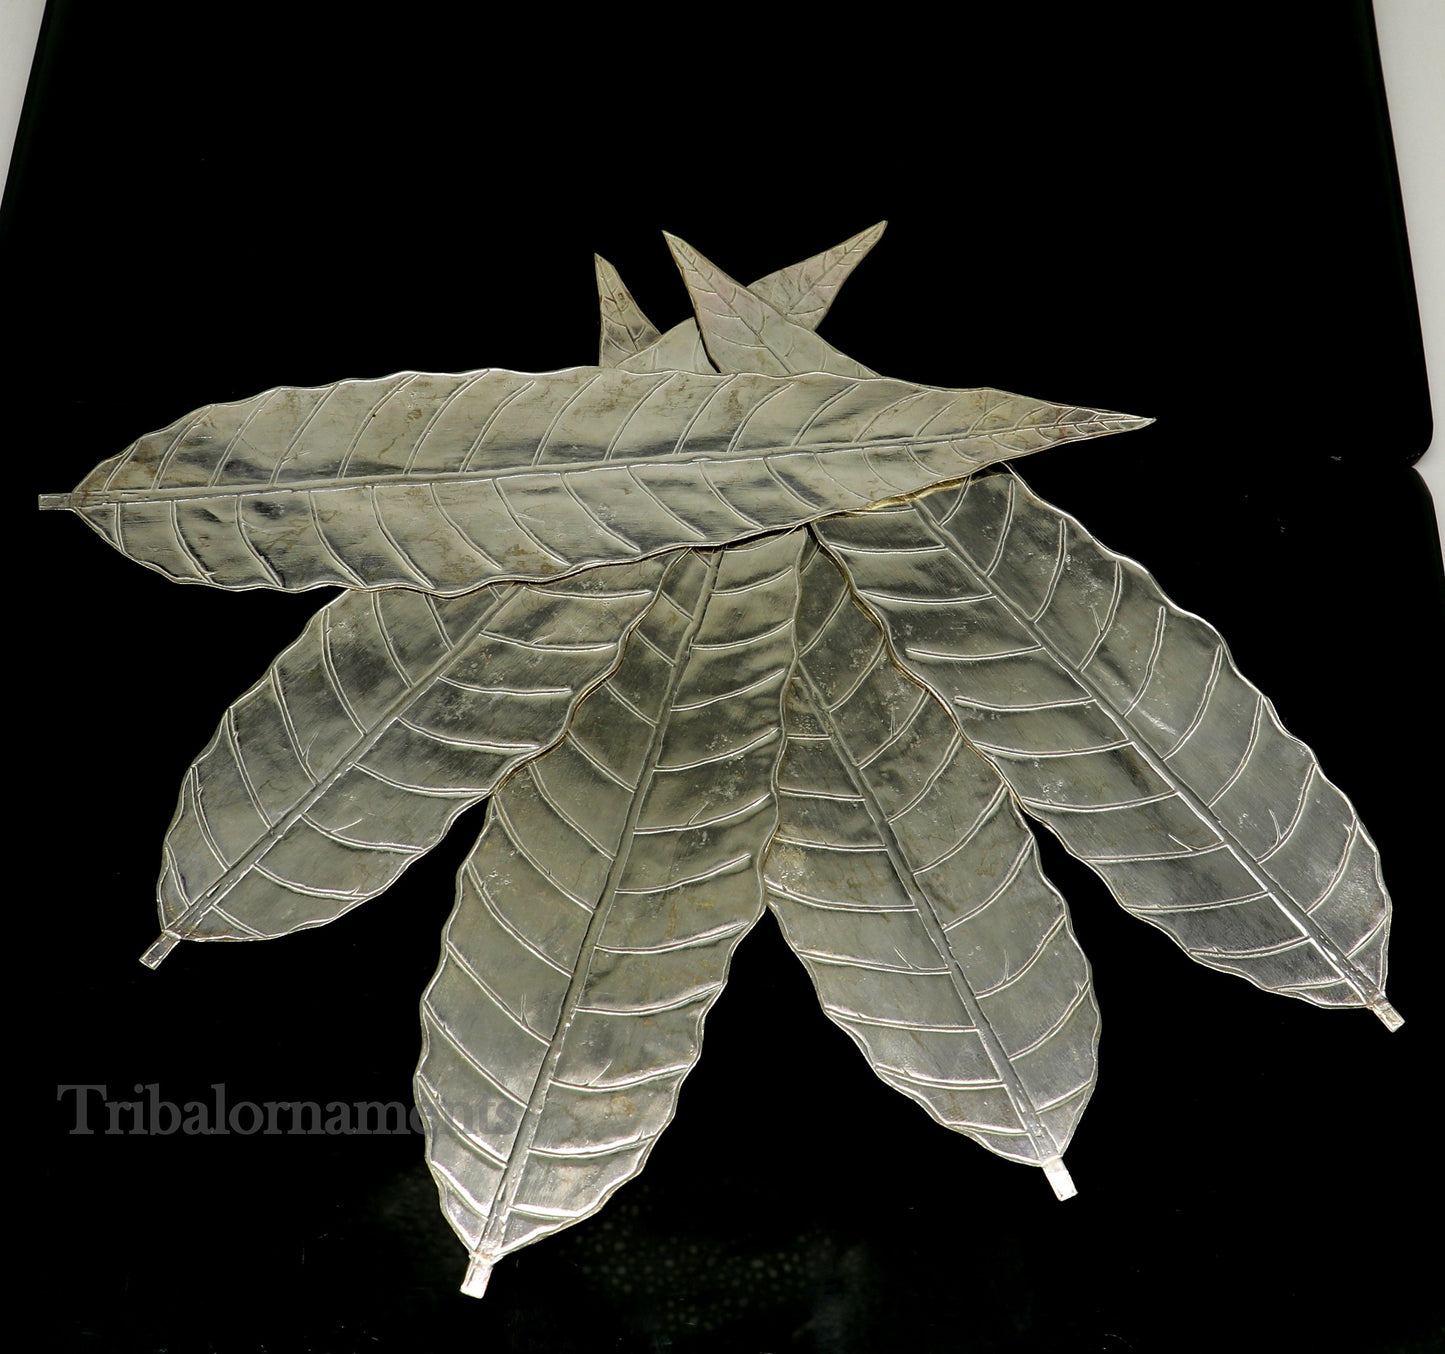 Silver mango tree design leaf Amazing puja worshipping article solid sterling silver diwali puja articles, silver utensils from india su512 - TRIBAL ORNAMENTS